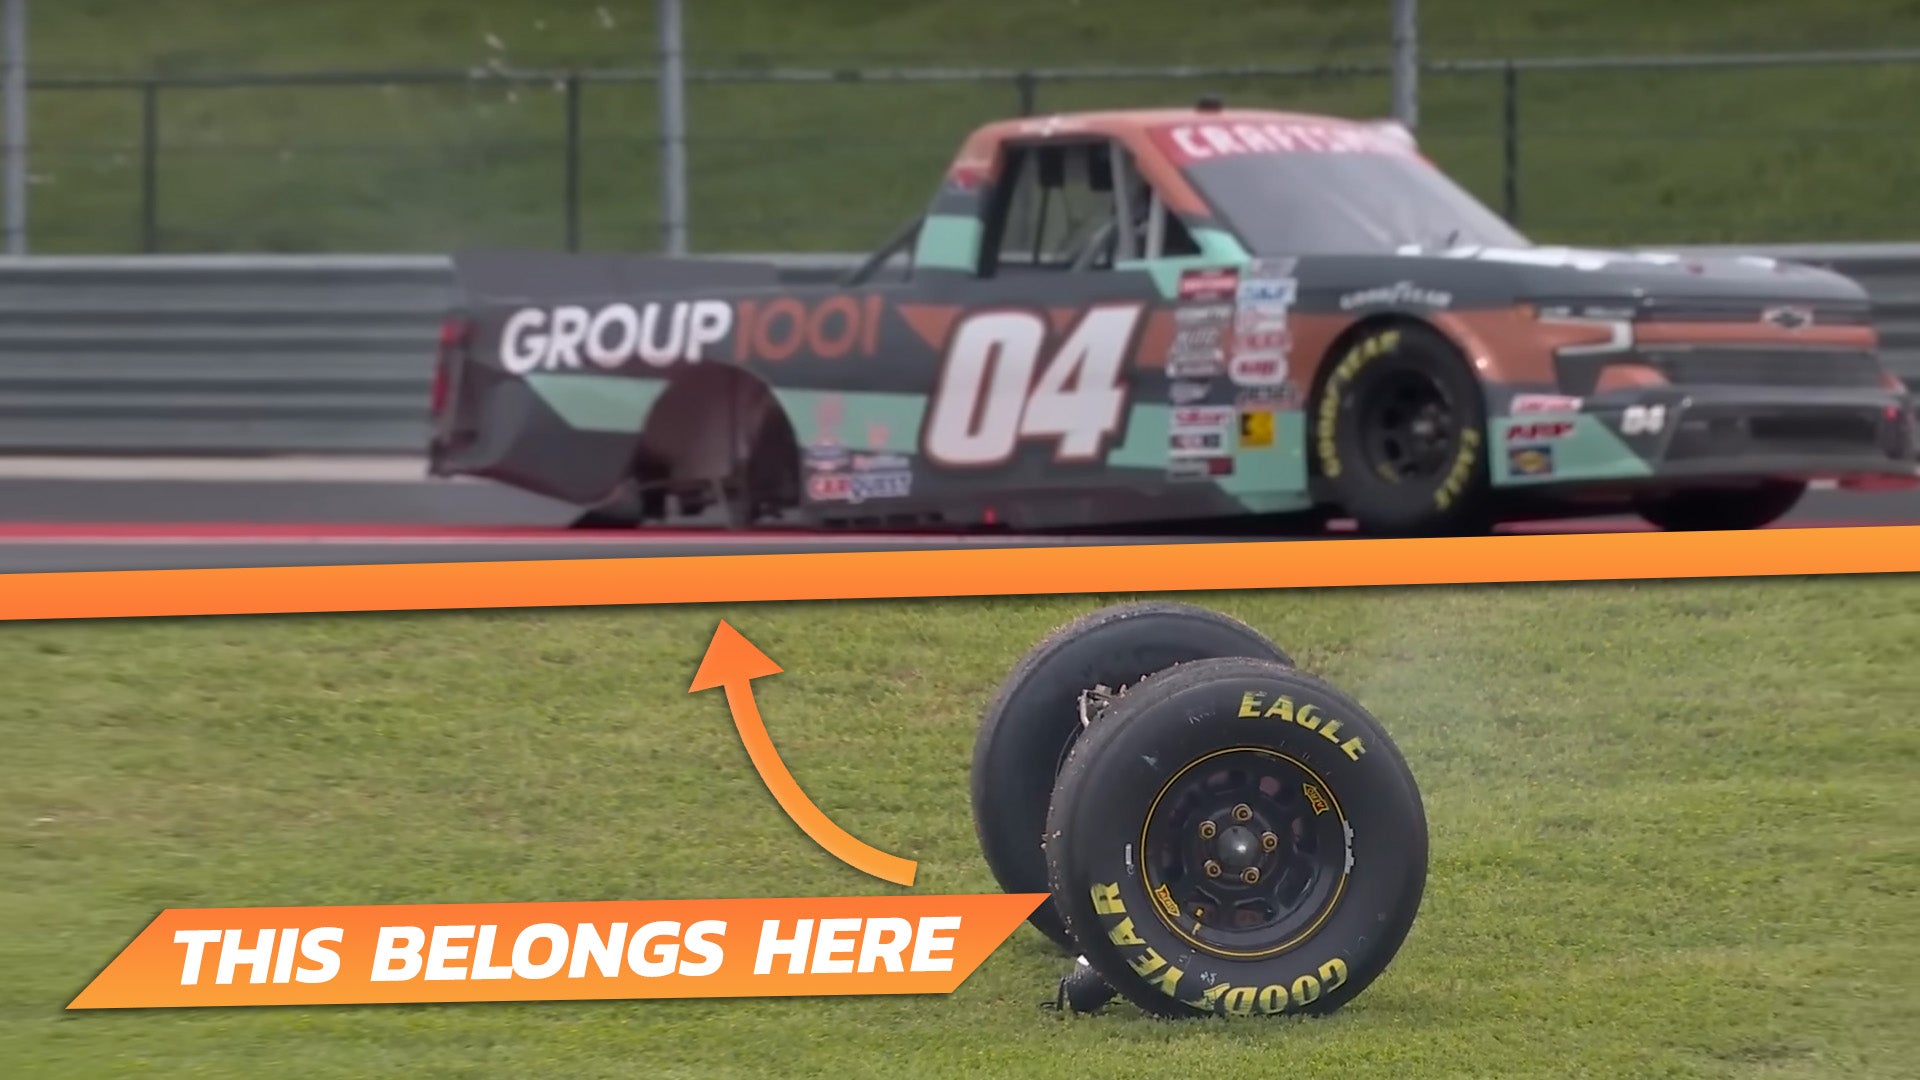 The back end of a NASCAR truck completely detached during a race at COTA.